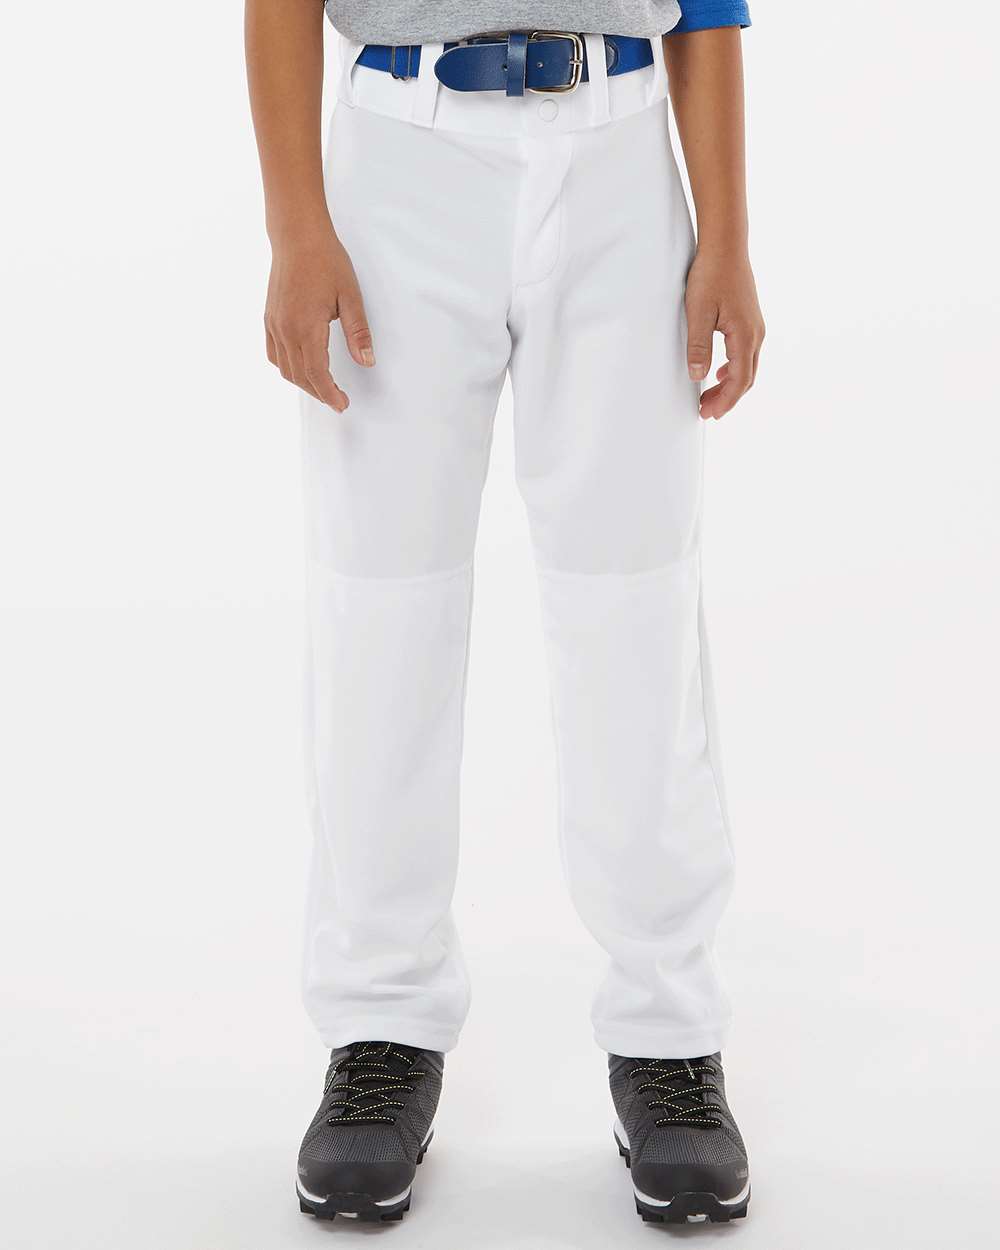 Alleson Athletic 605WLPY - Youth Baseball Pants